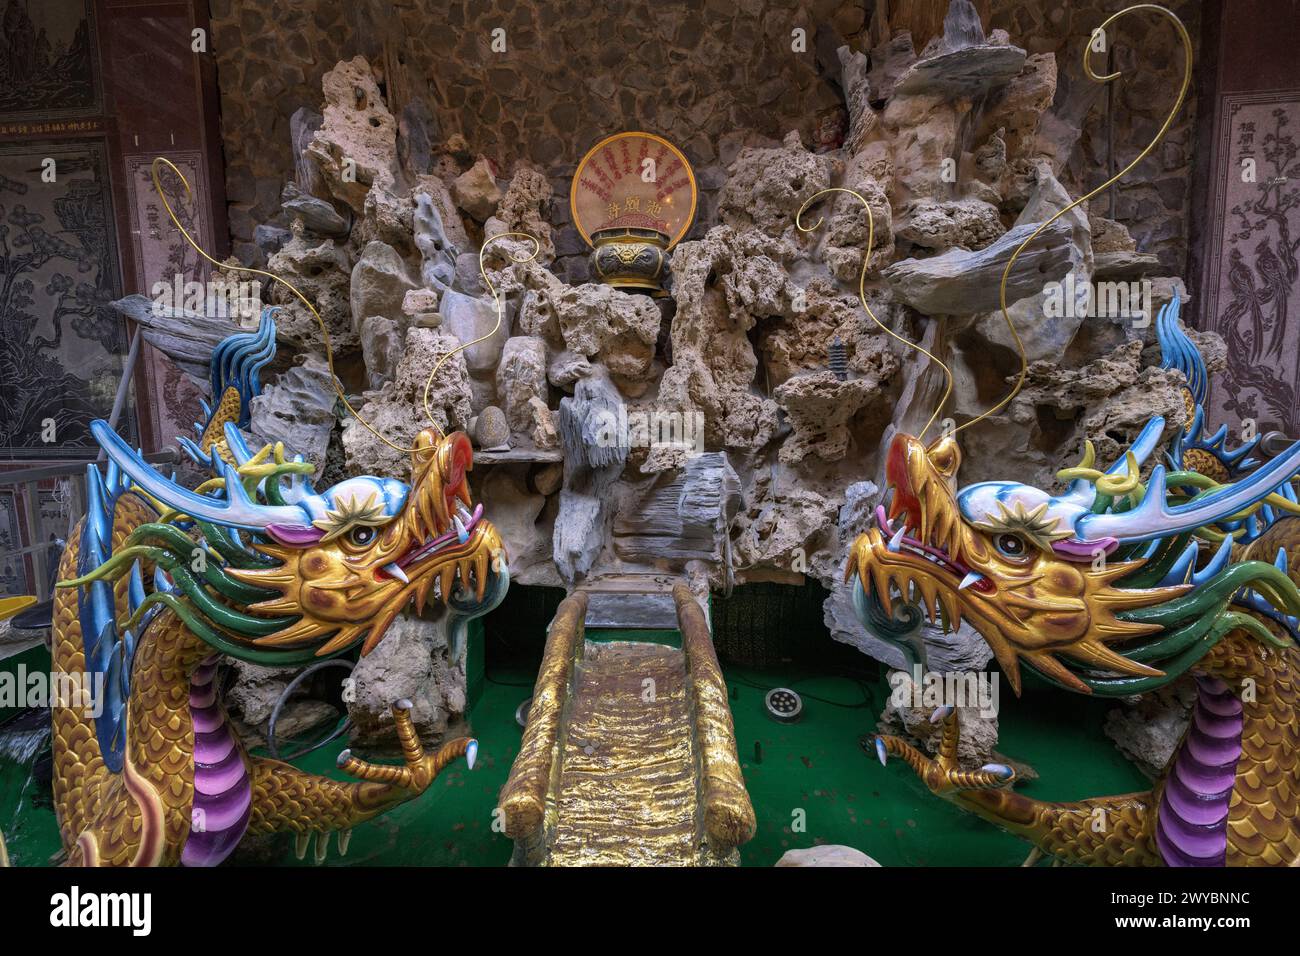 Pond with mythological carvings within Sicao Dazhong Temple displaying craftsmanship and cultural heritage Stock Photo